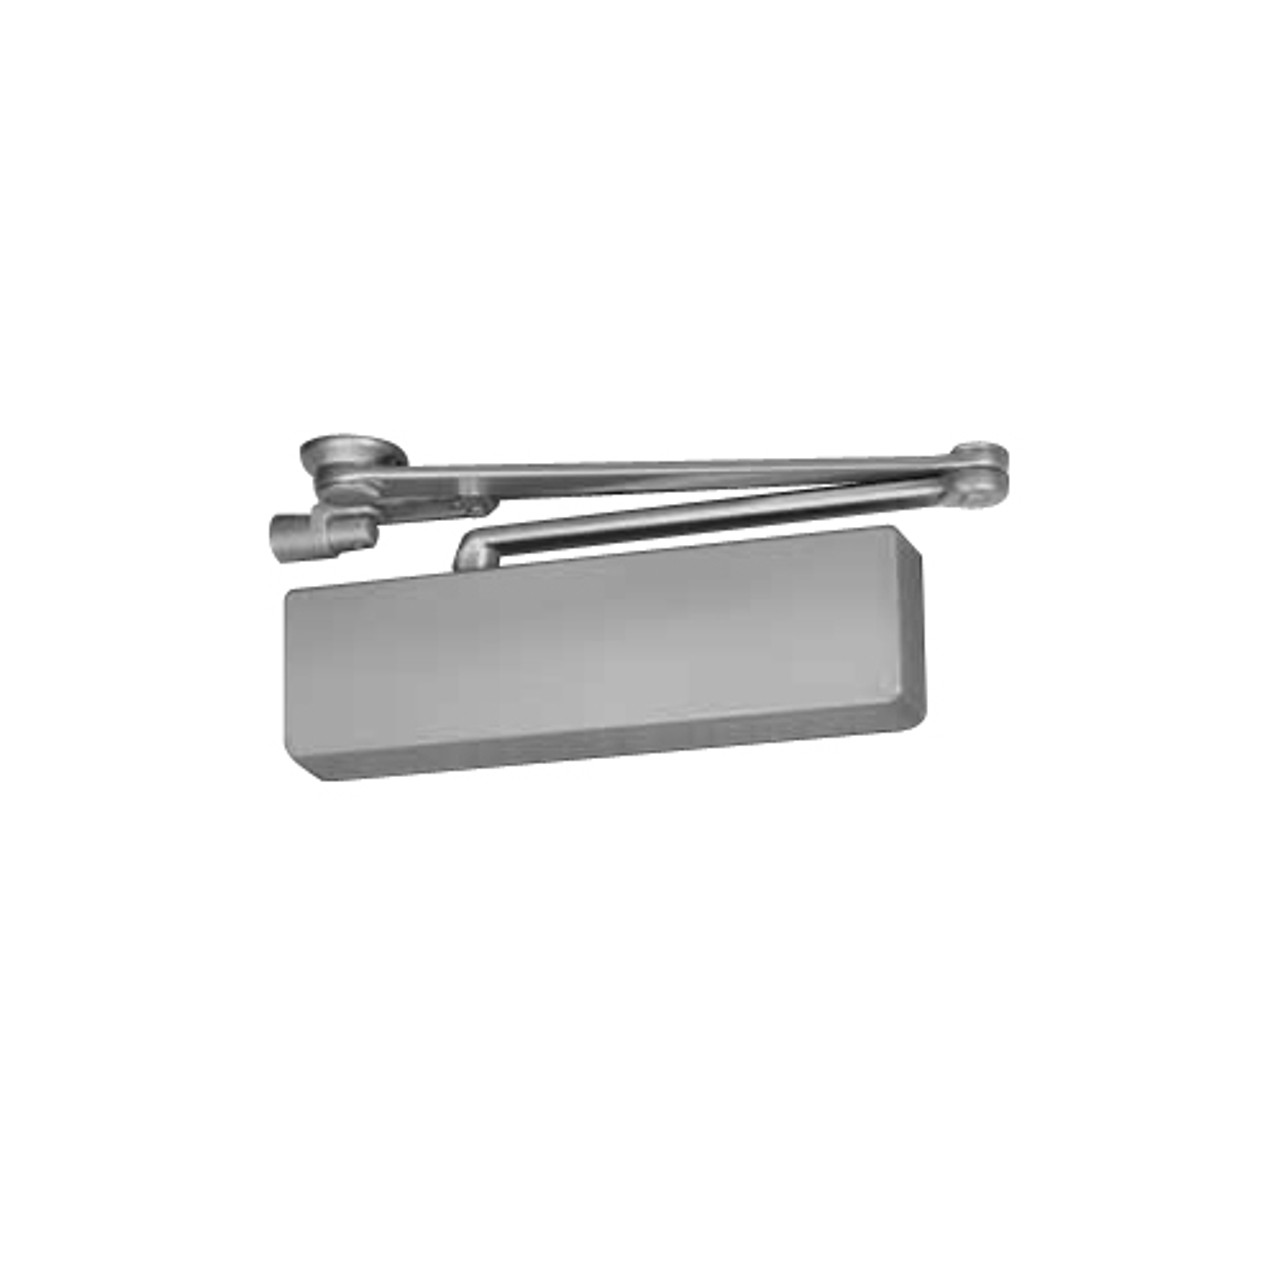 CPS7570TDA-689-LH Norton 7570 Series Security Door CloserPlus Spring Arm with Thumbturn Hold Open in Aluminum Finish